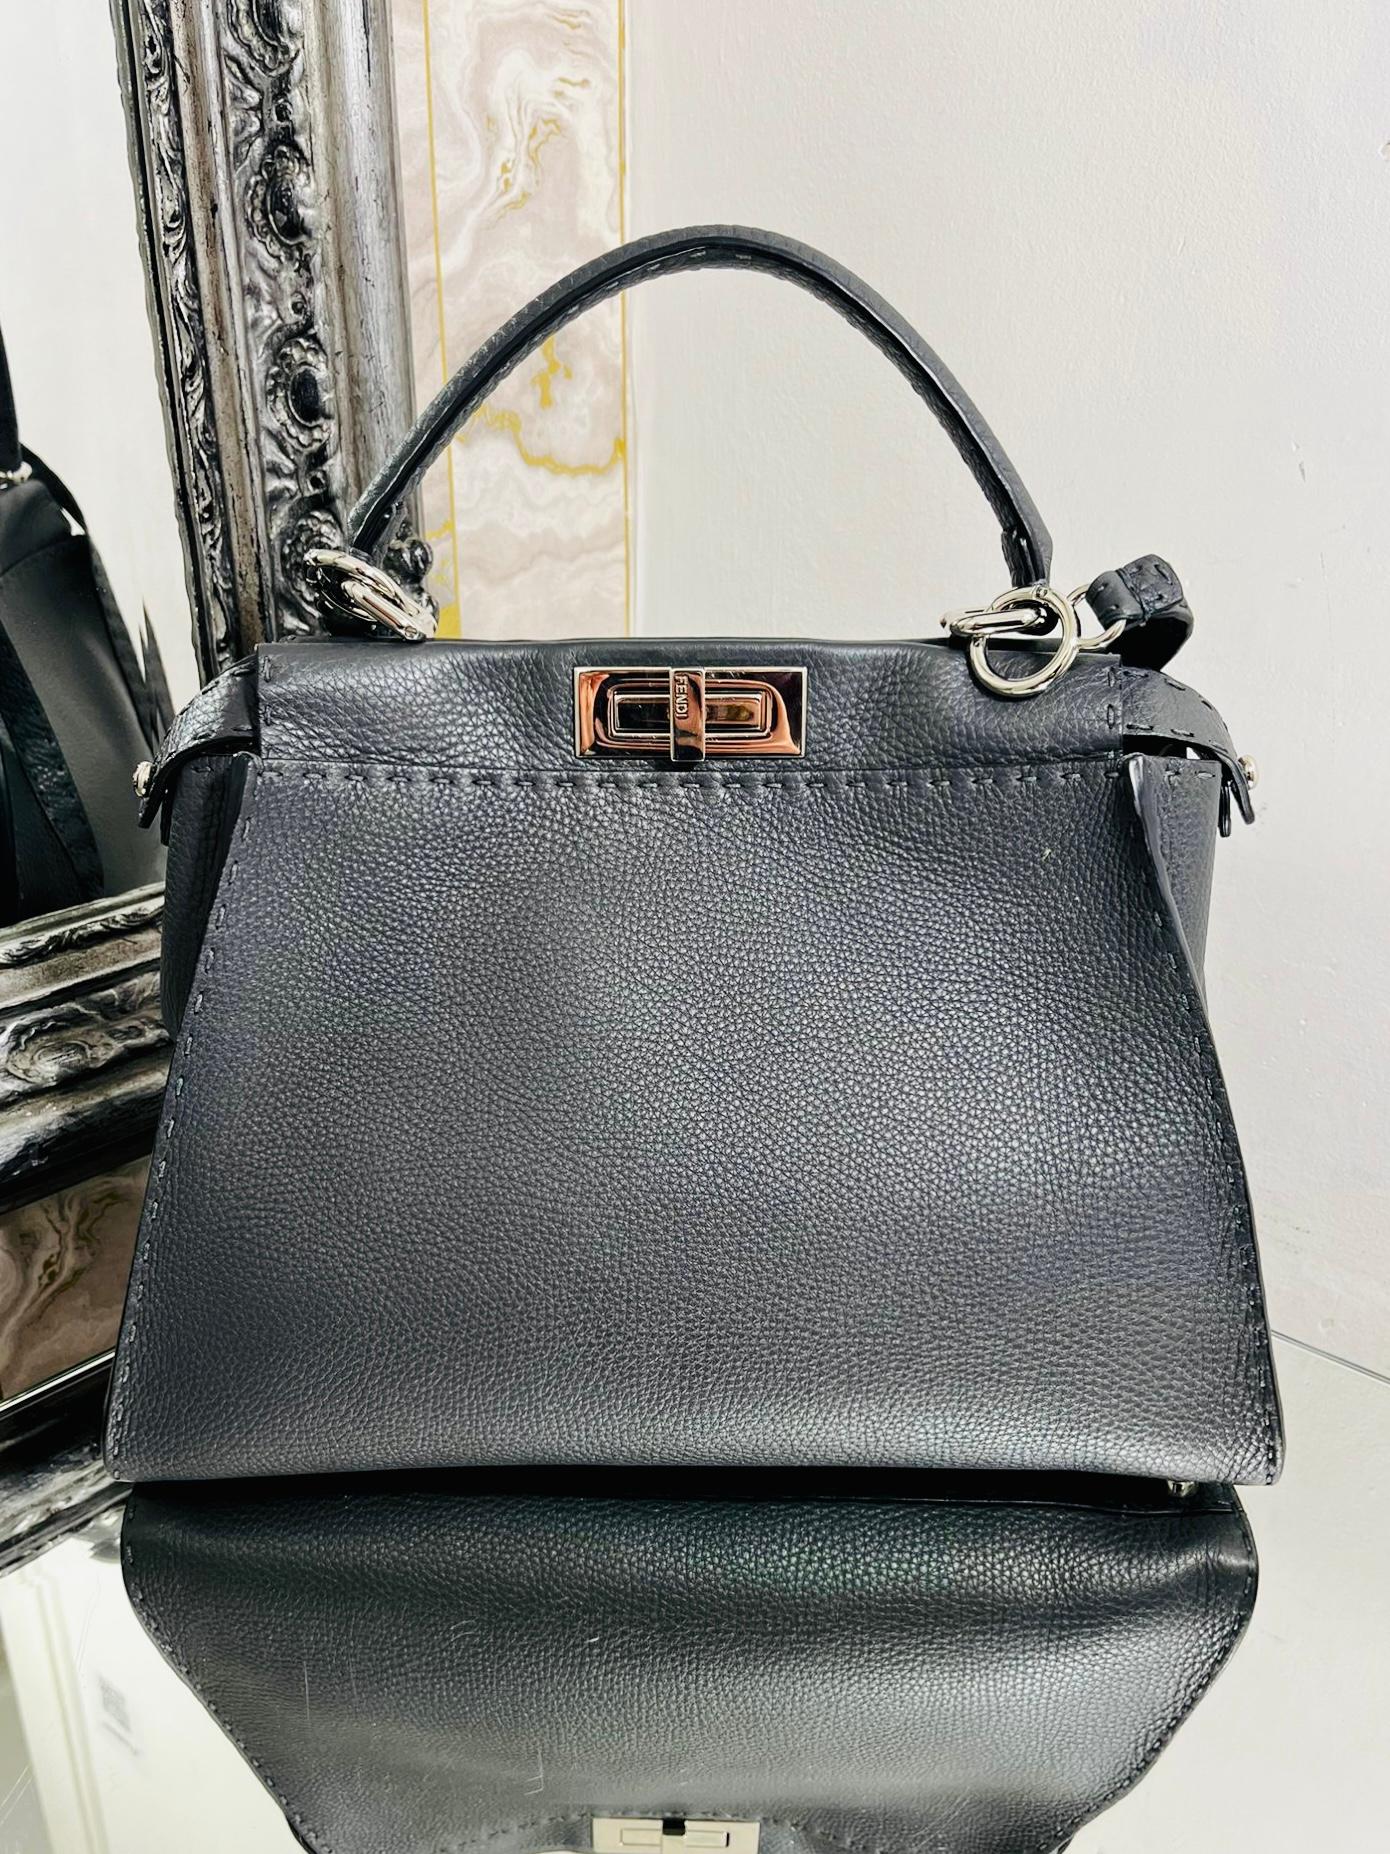 Fendi Peekaboo Medium Model Leather Bag In Excellent Condition For Sale In London, GB